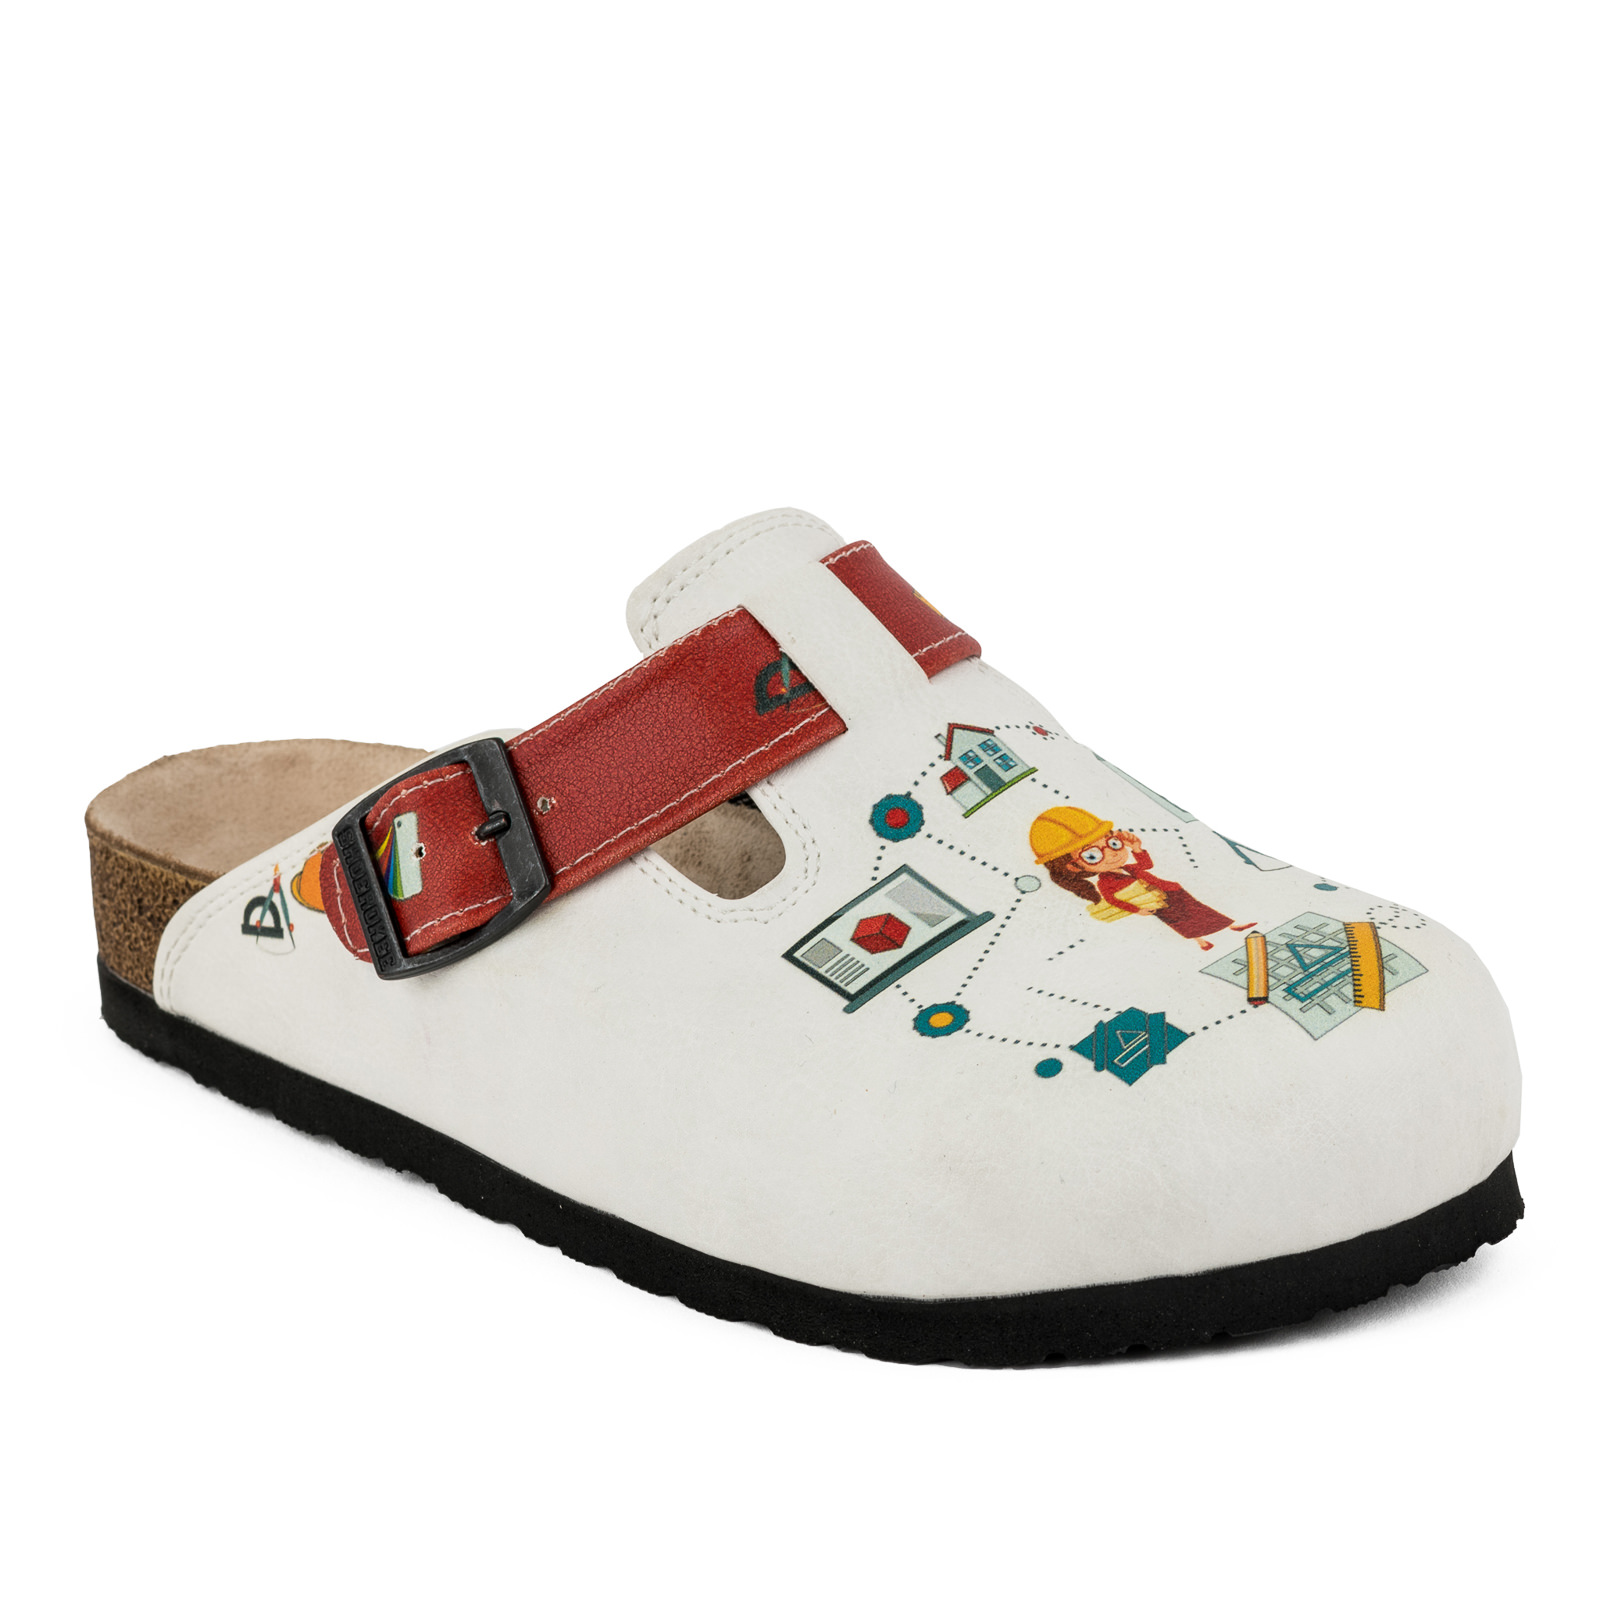 Patterned women clogs A095 - ARCHITECT - WHITE